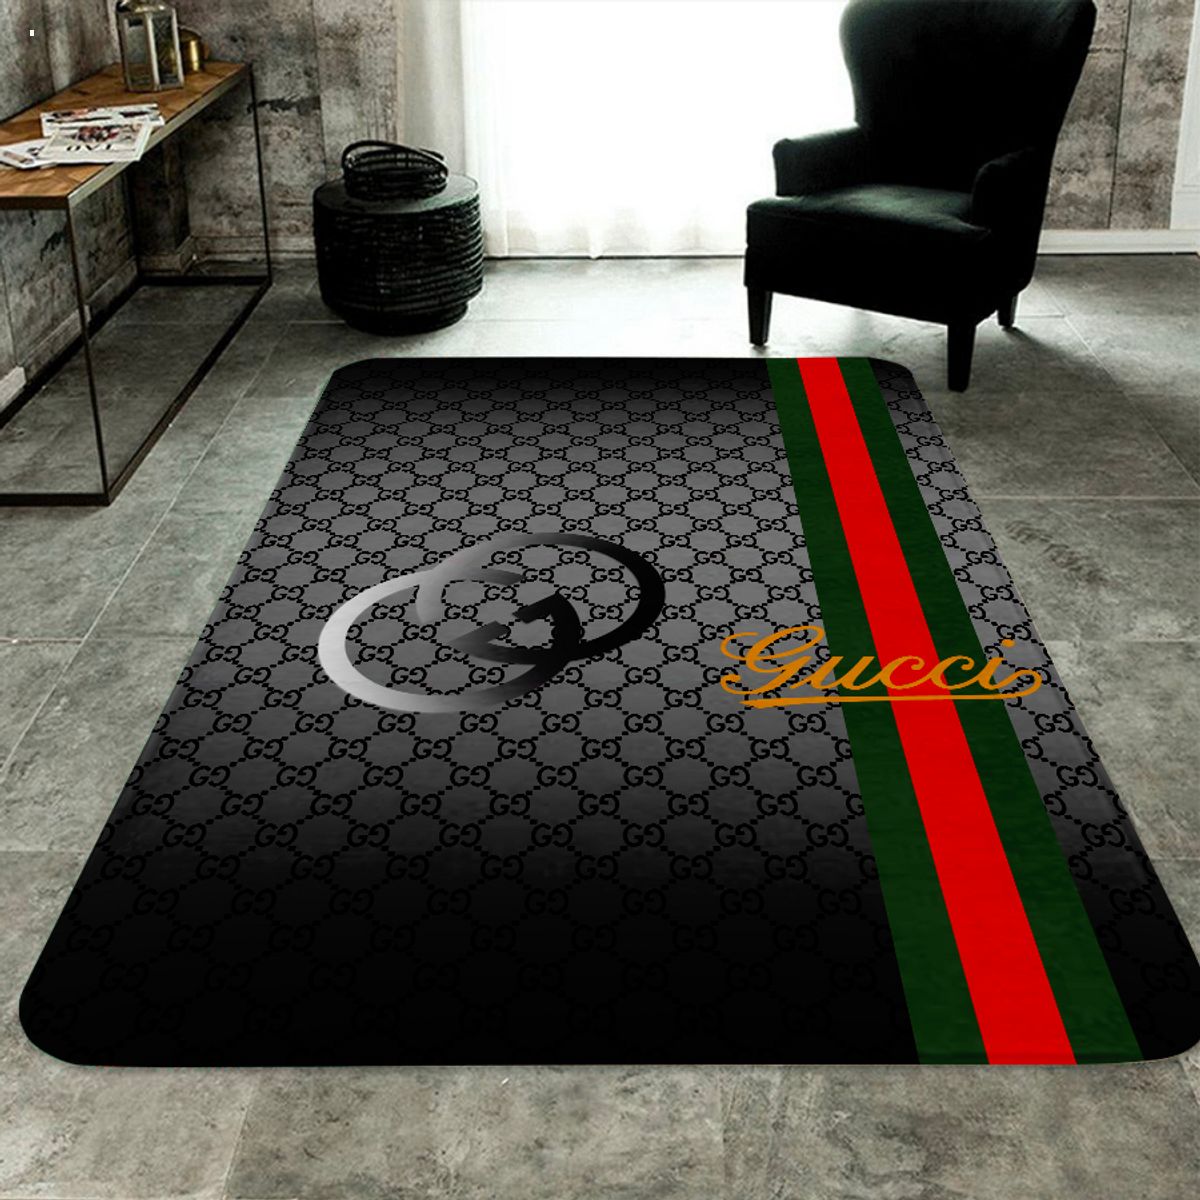 BEST Gucci Black Mix Green Red Luxury Brand Carpet Rug Limited Edition